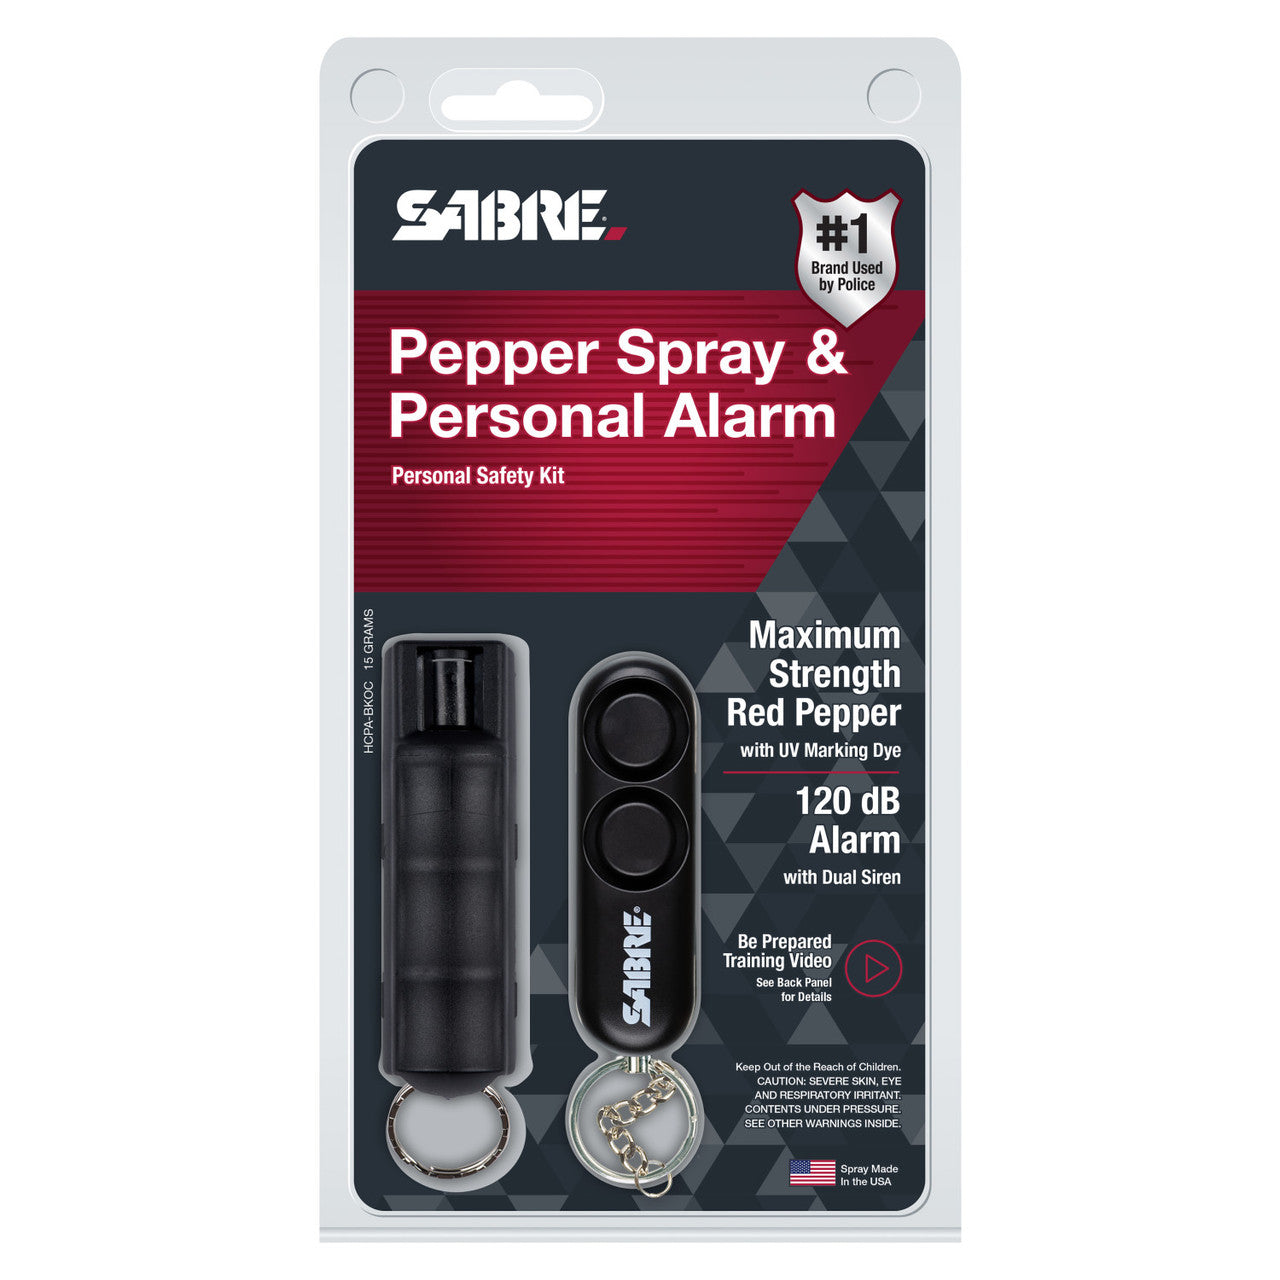 SABRE Pepper Spray Keychain & Personal Alarm Safety Kit